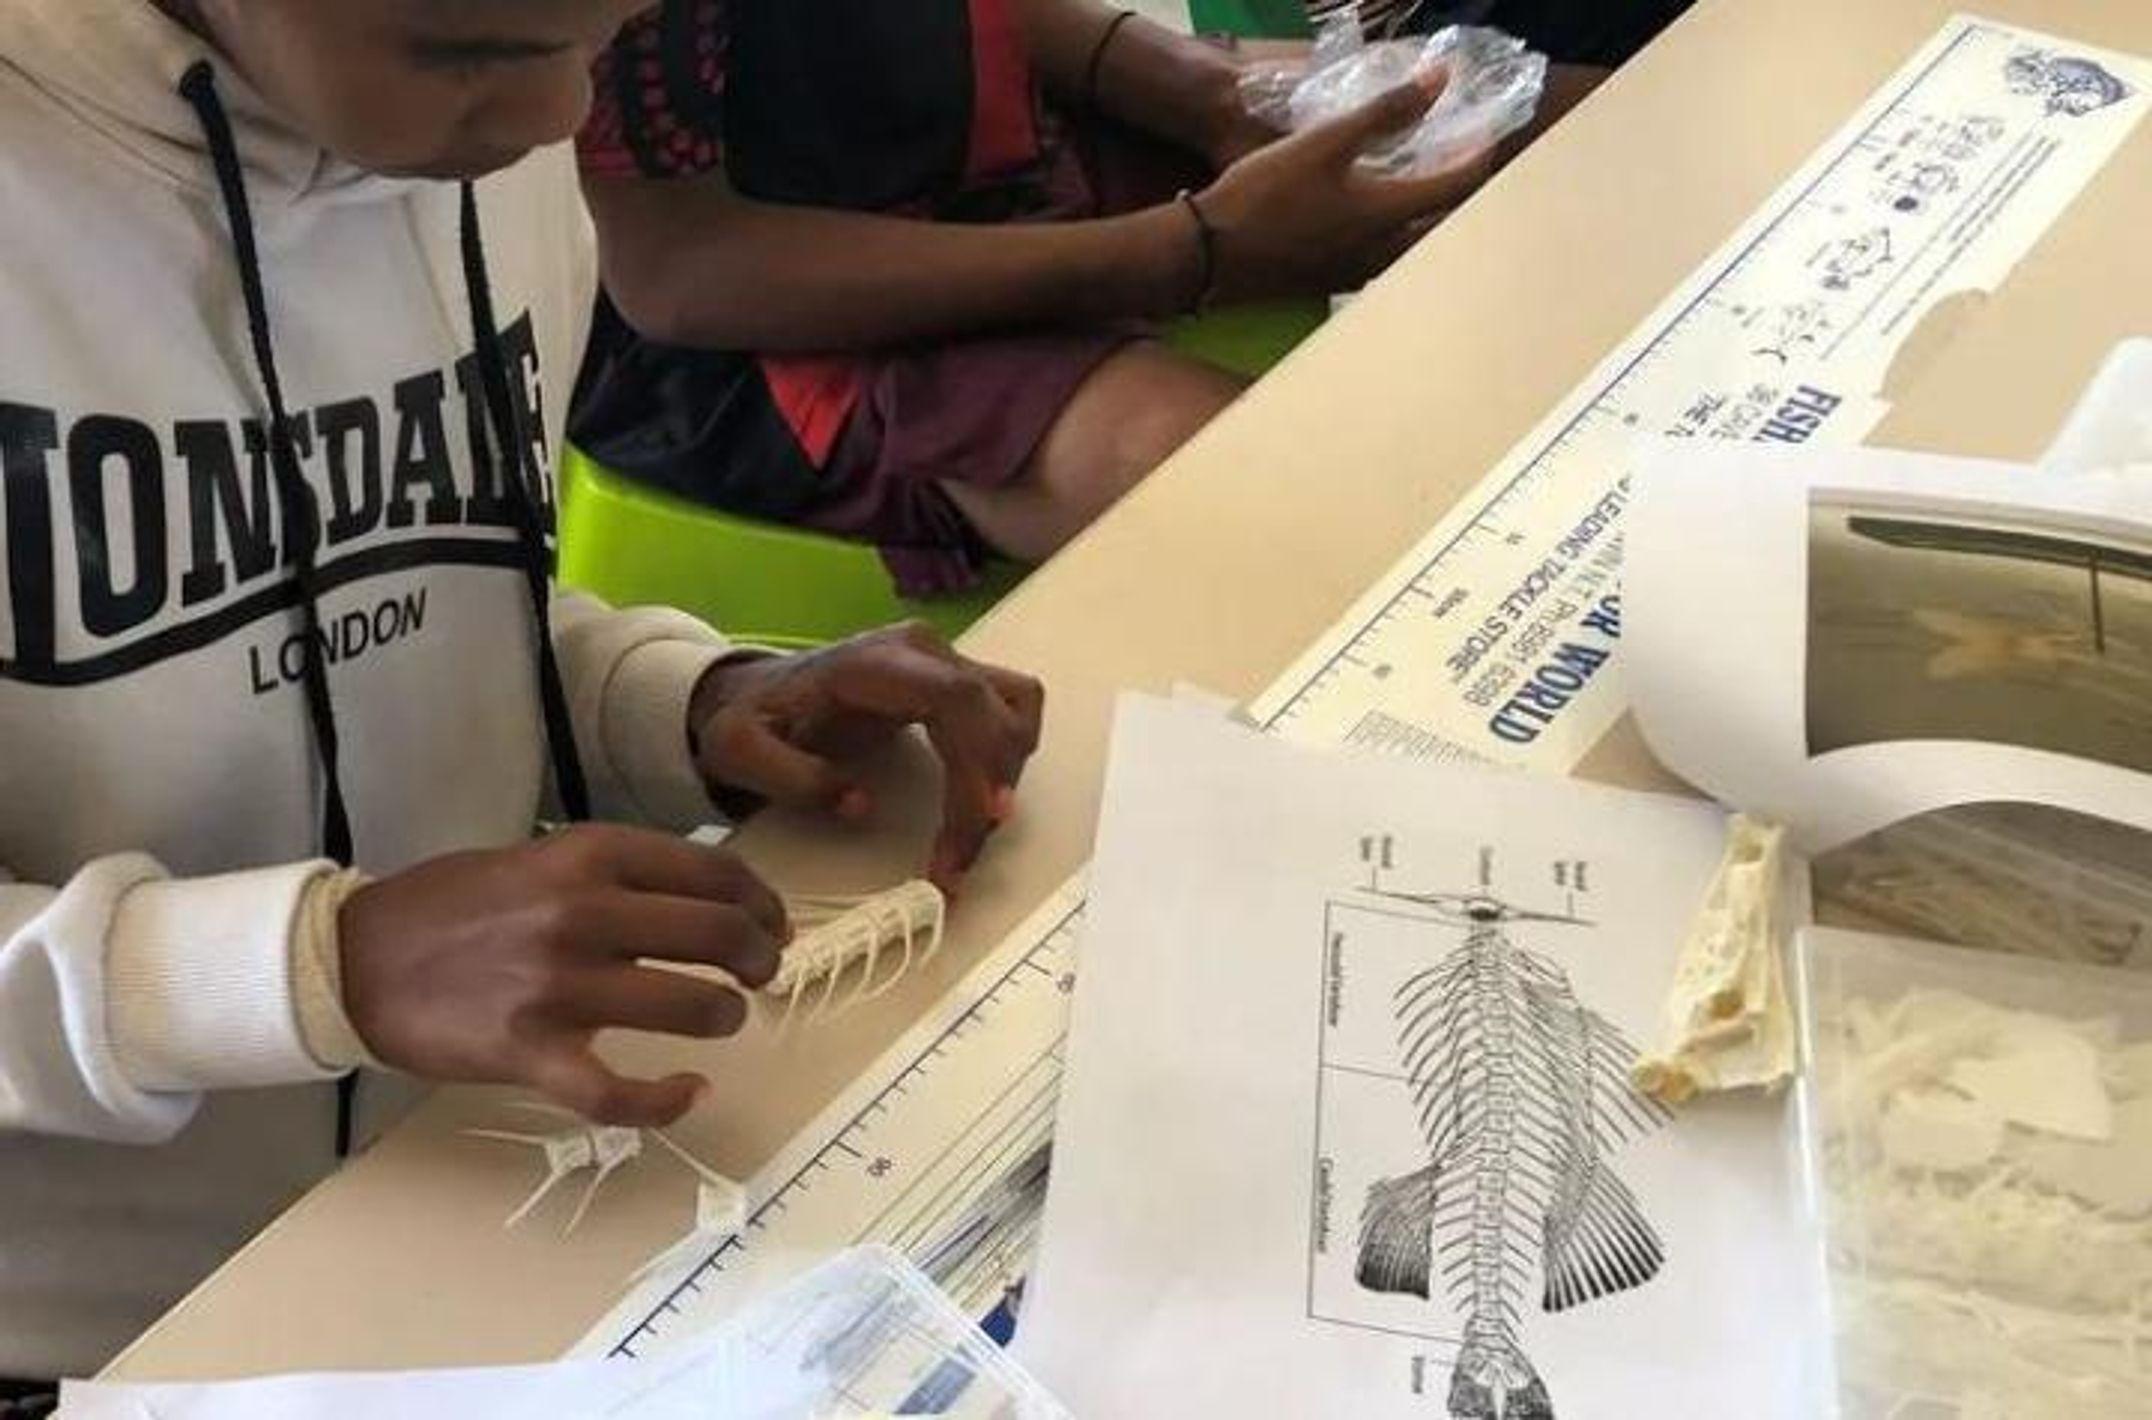 Students learning about fish skeletal system using reference collections, Credit Morgan Disspain